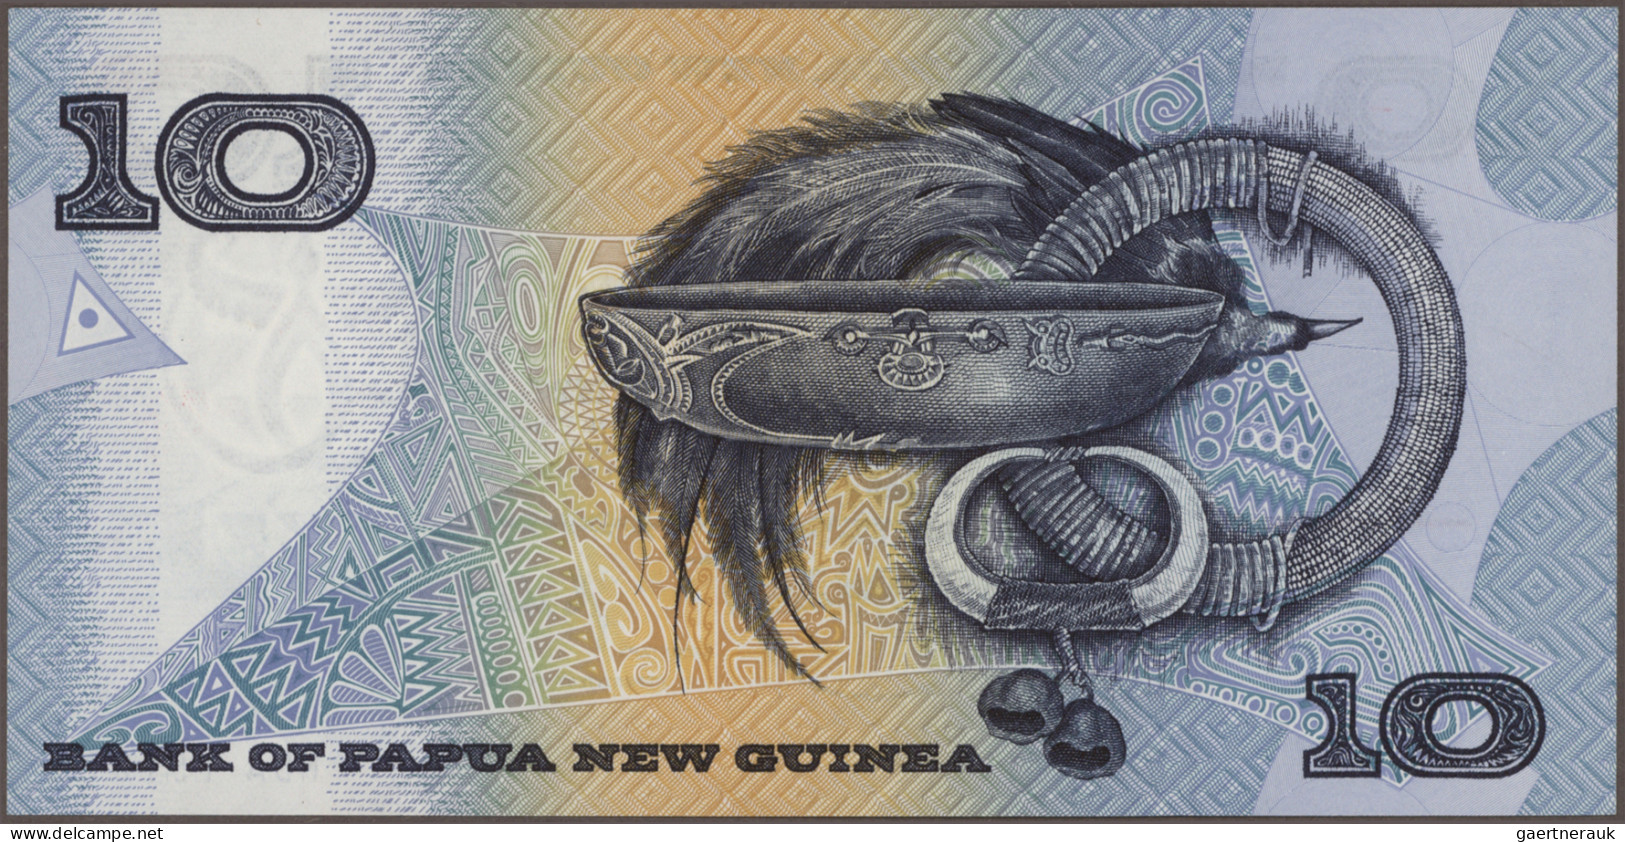 Papua New Guinea: Bank of Papua New Guinea, lot with 31 banknotes, series 1975-2